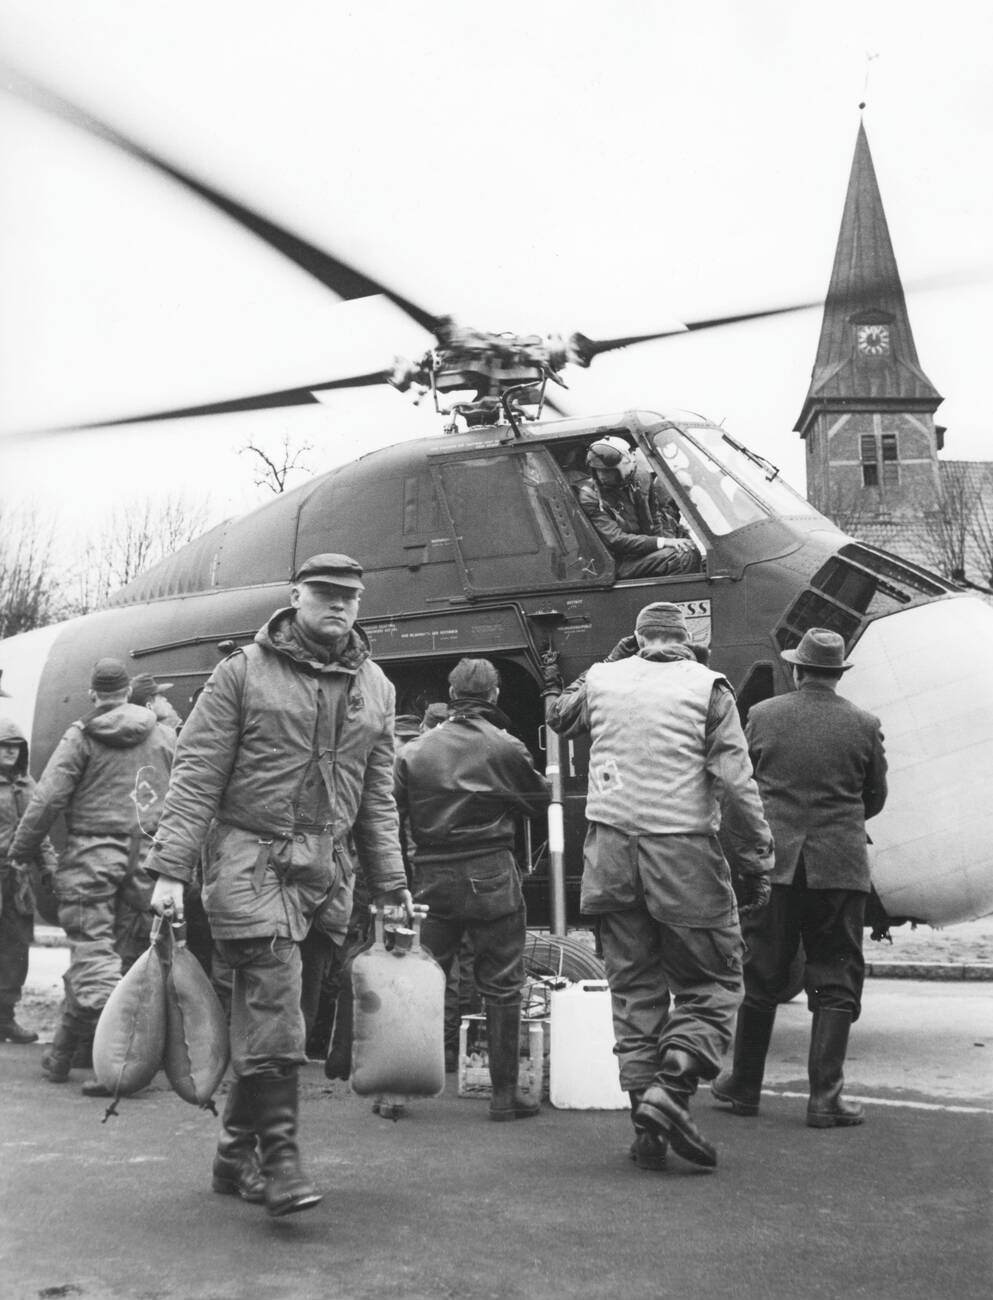 Unloading a helicopter during the North Sea Flood of 1962 in Hamburg, West Germany